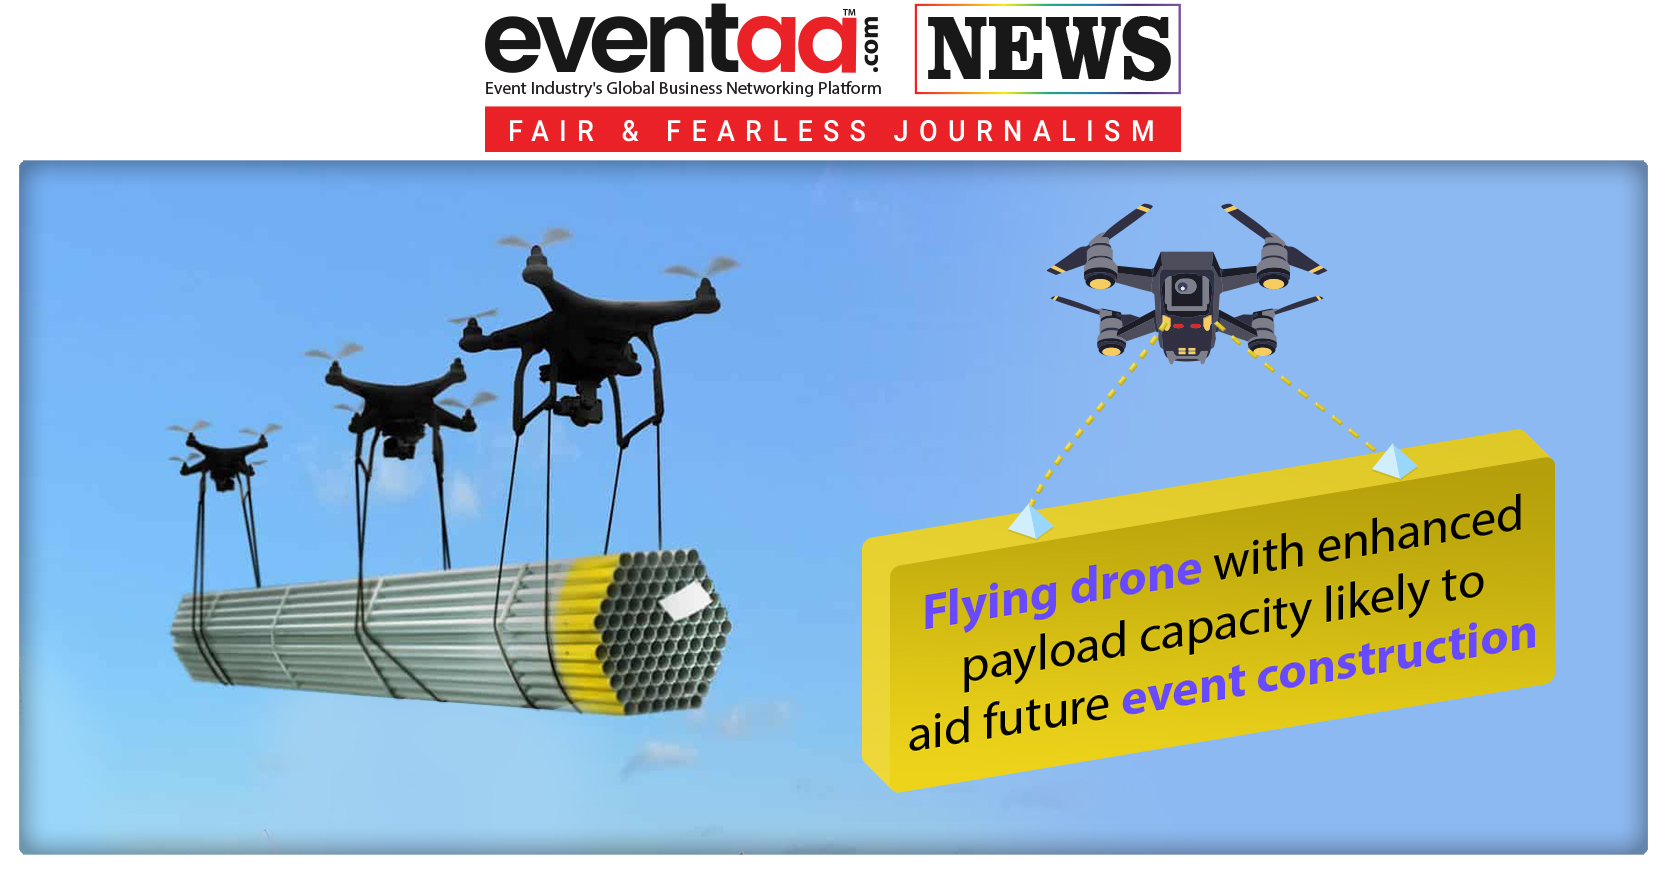 Flying Drone With Enhanced Payload Capacity Likely To Aid Future Event Construction